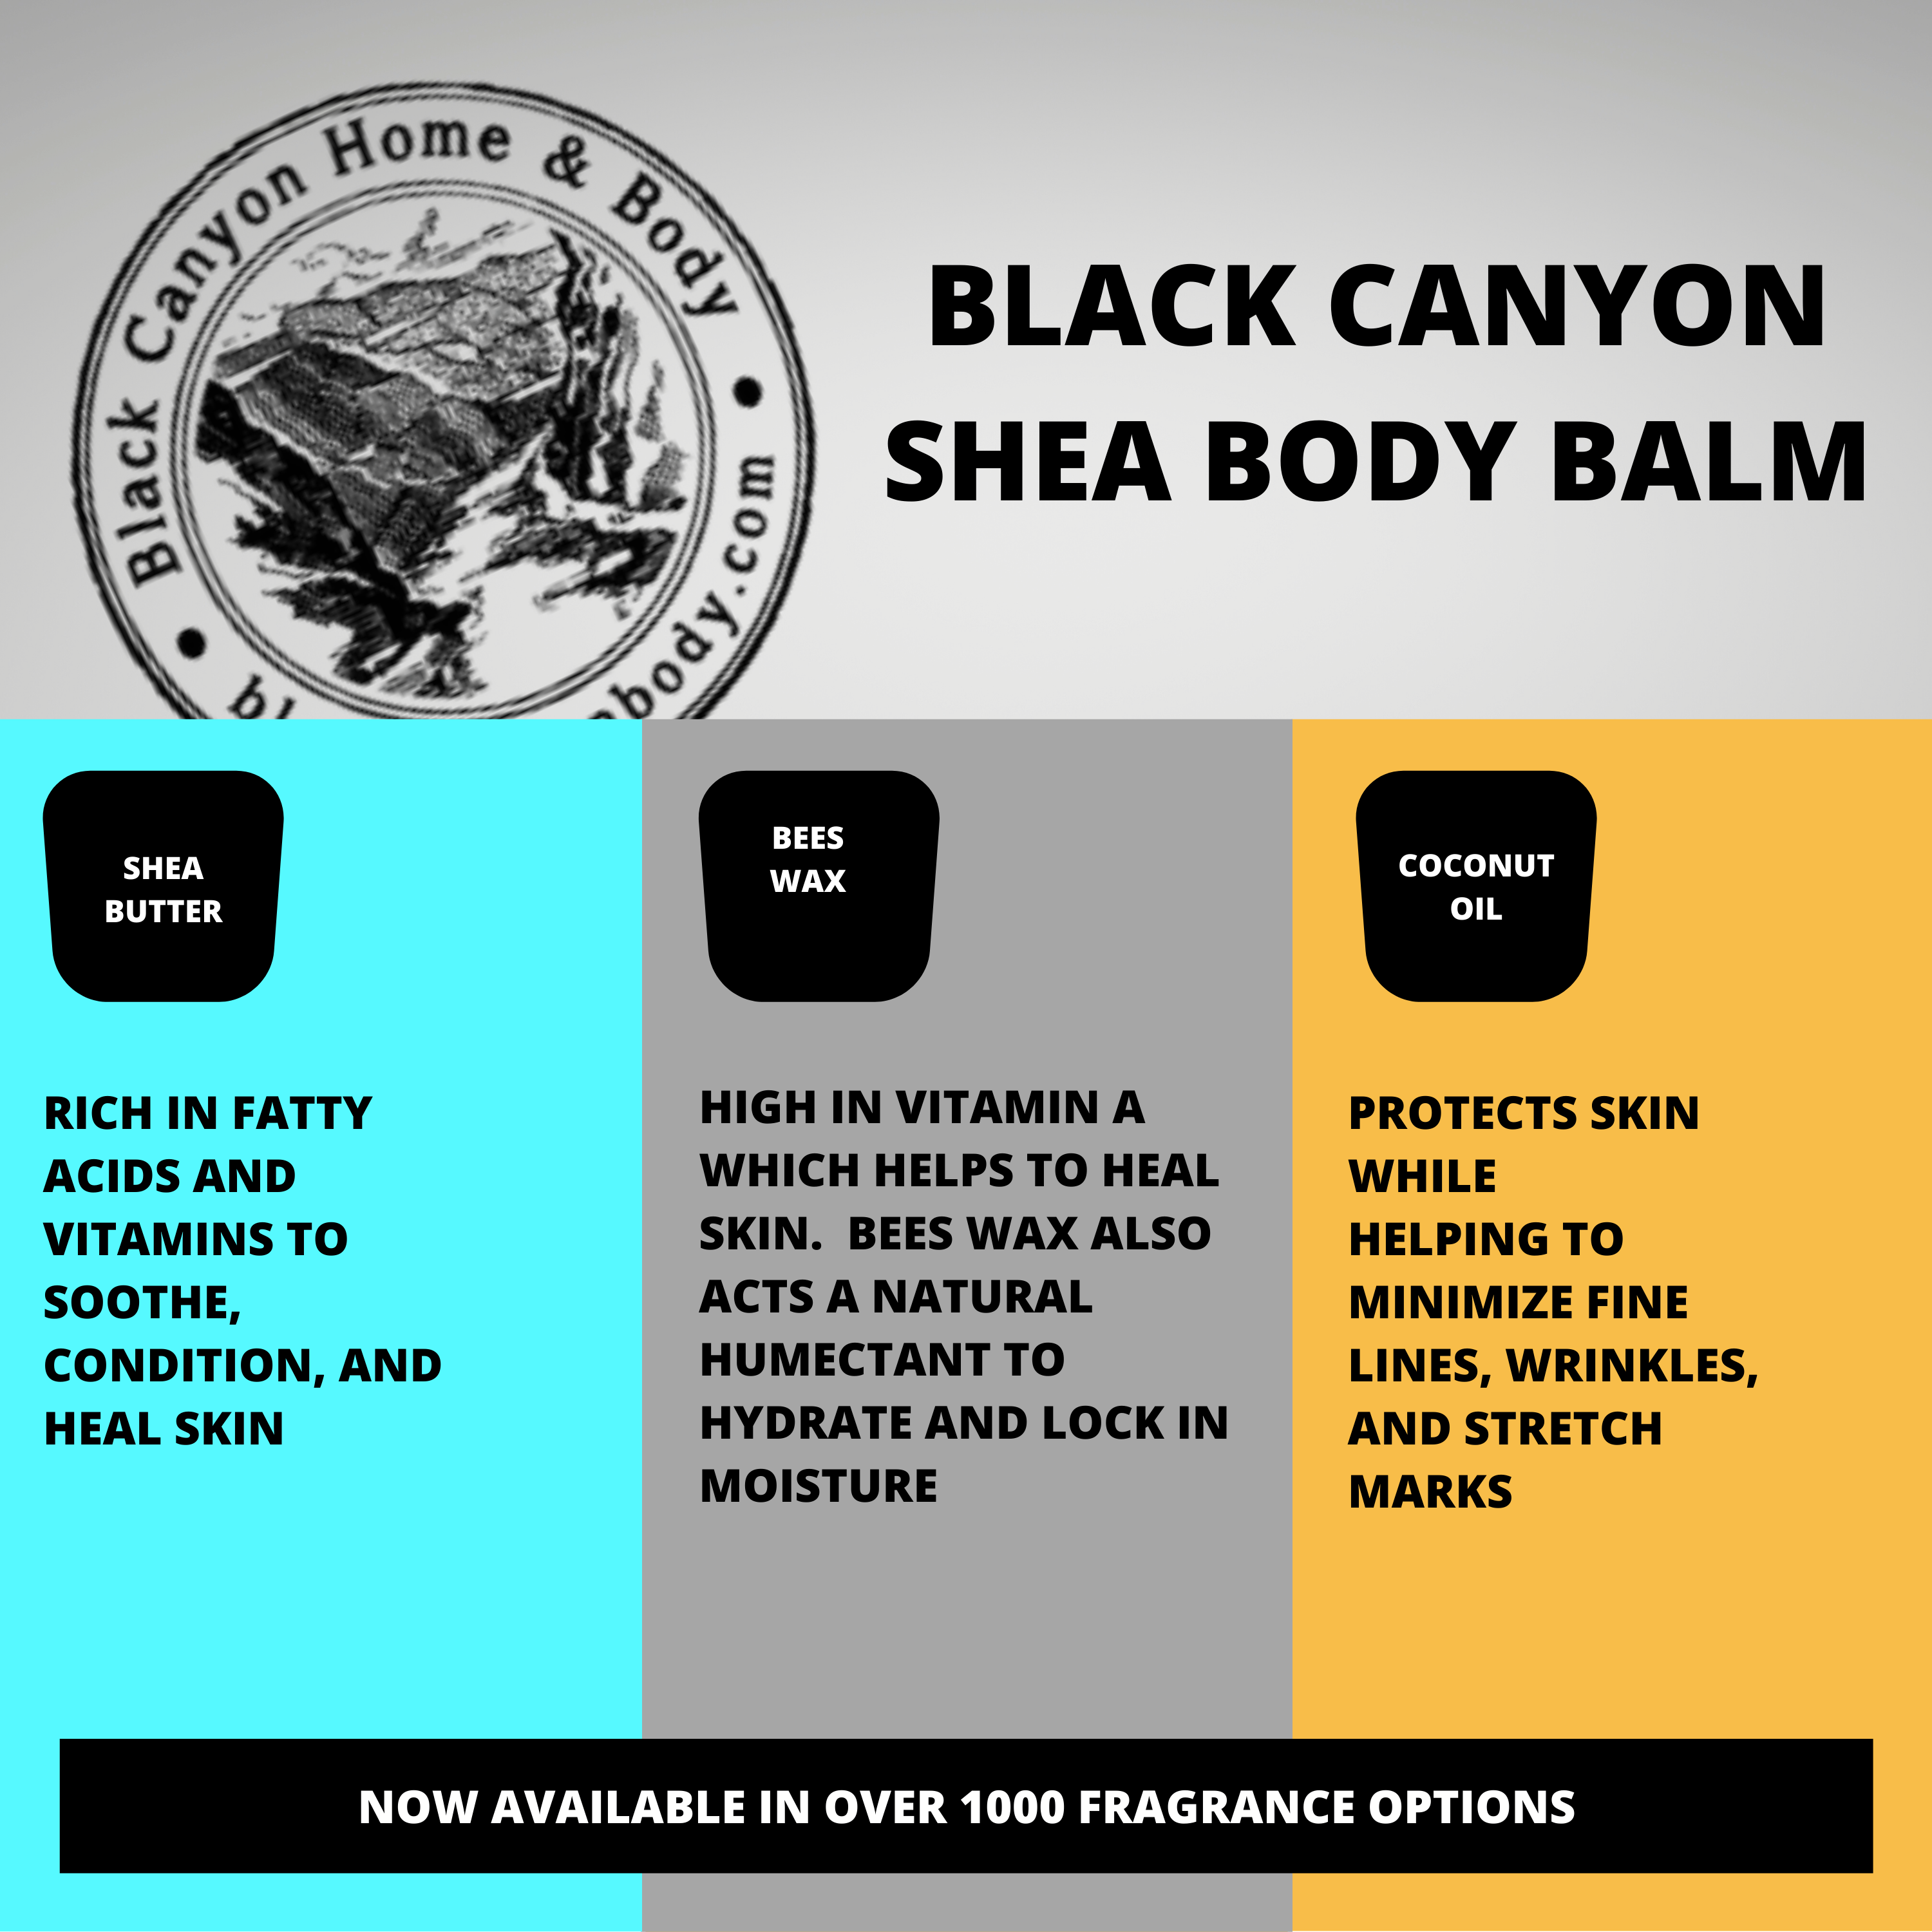 Black Canyon Easter Jelly Bean Scented Natural Body Balm with Shea